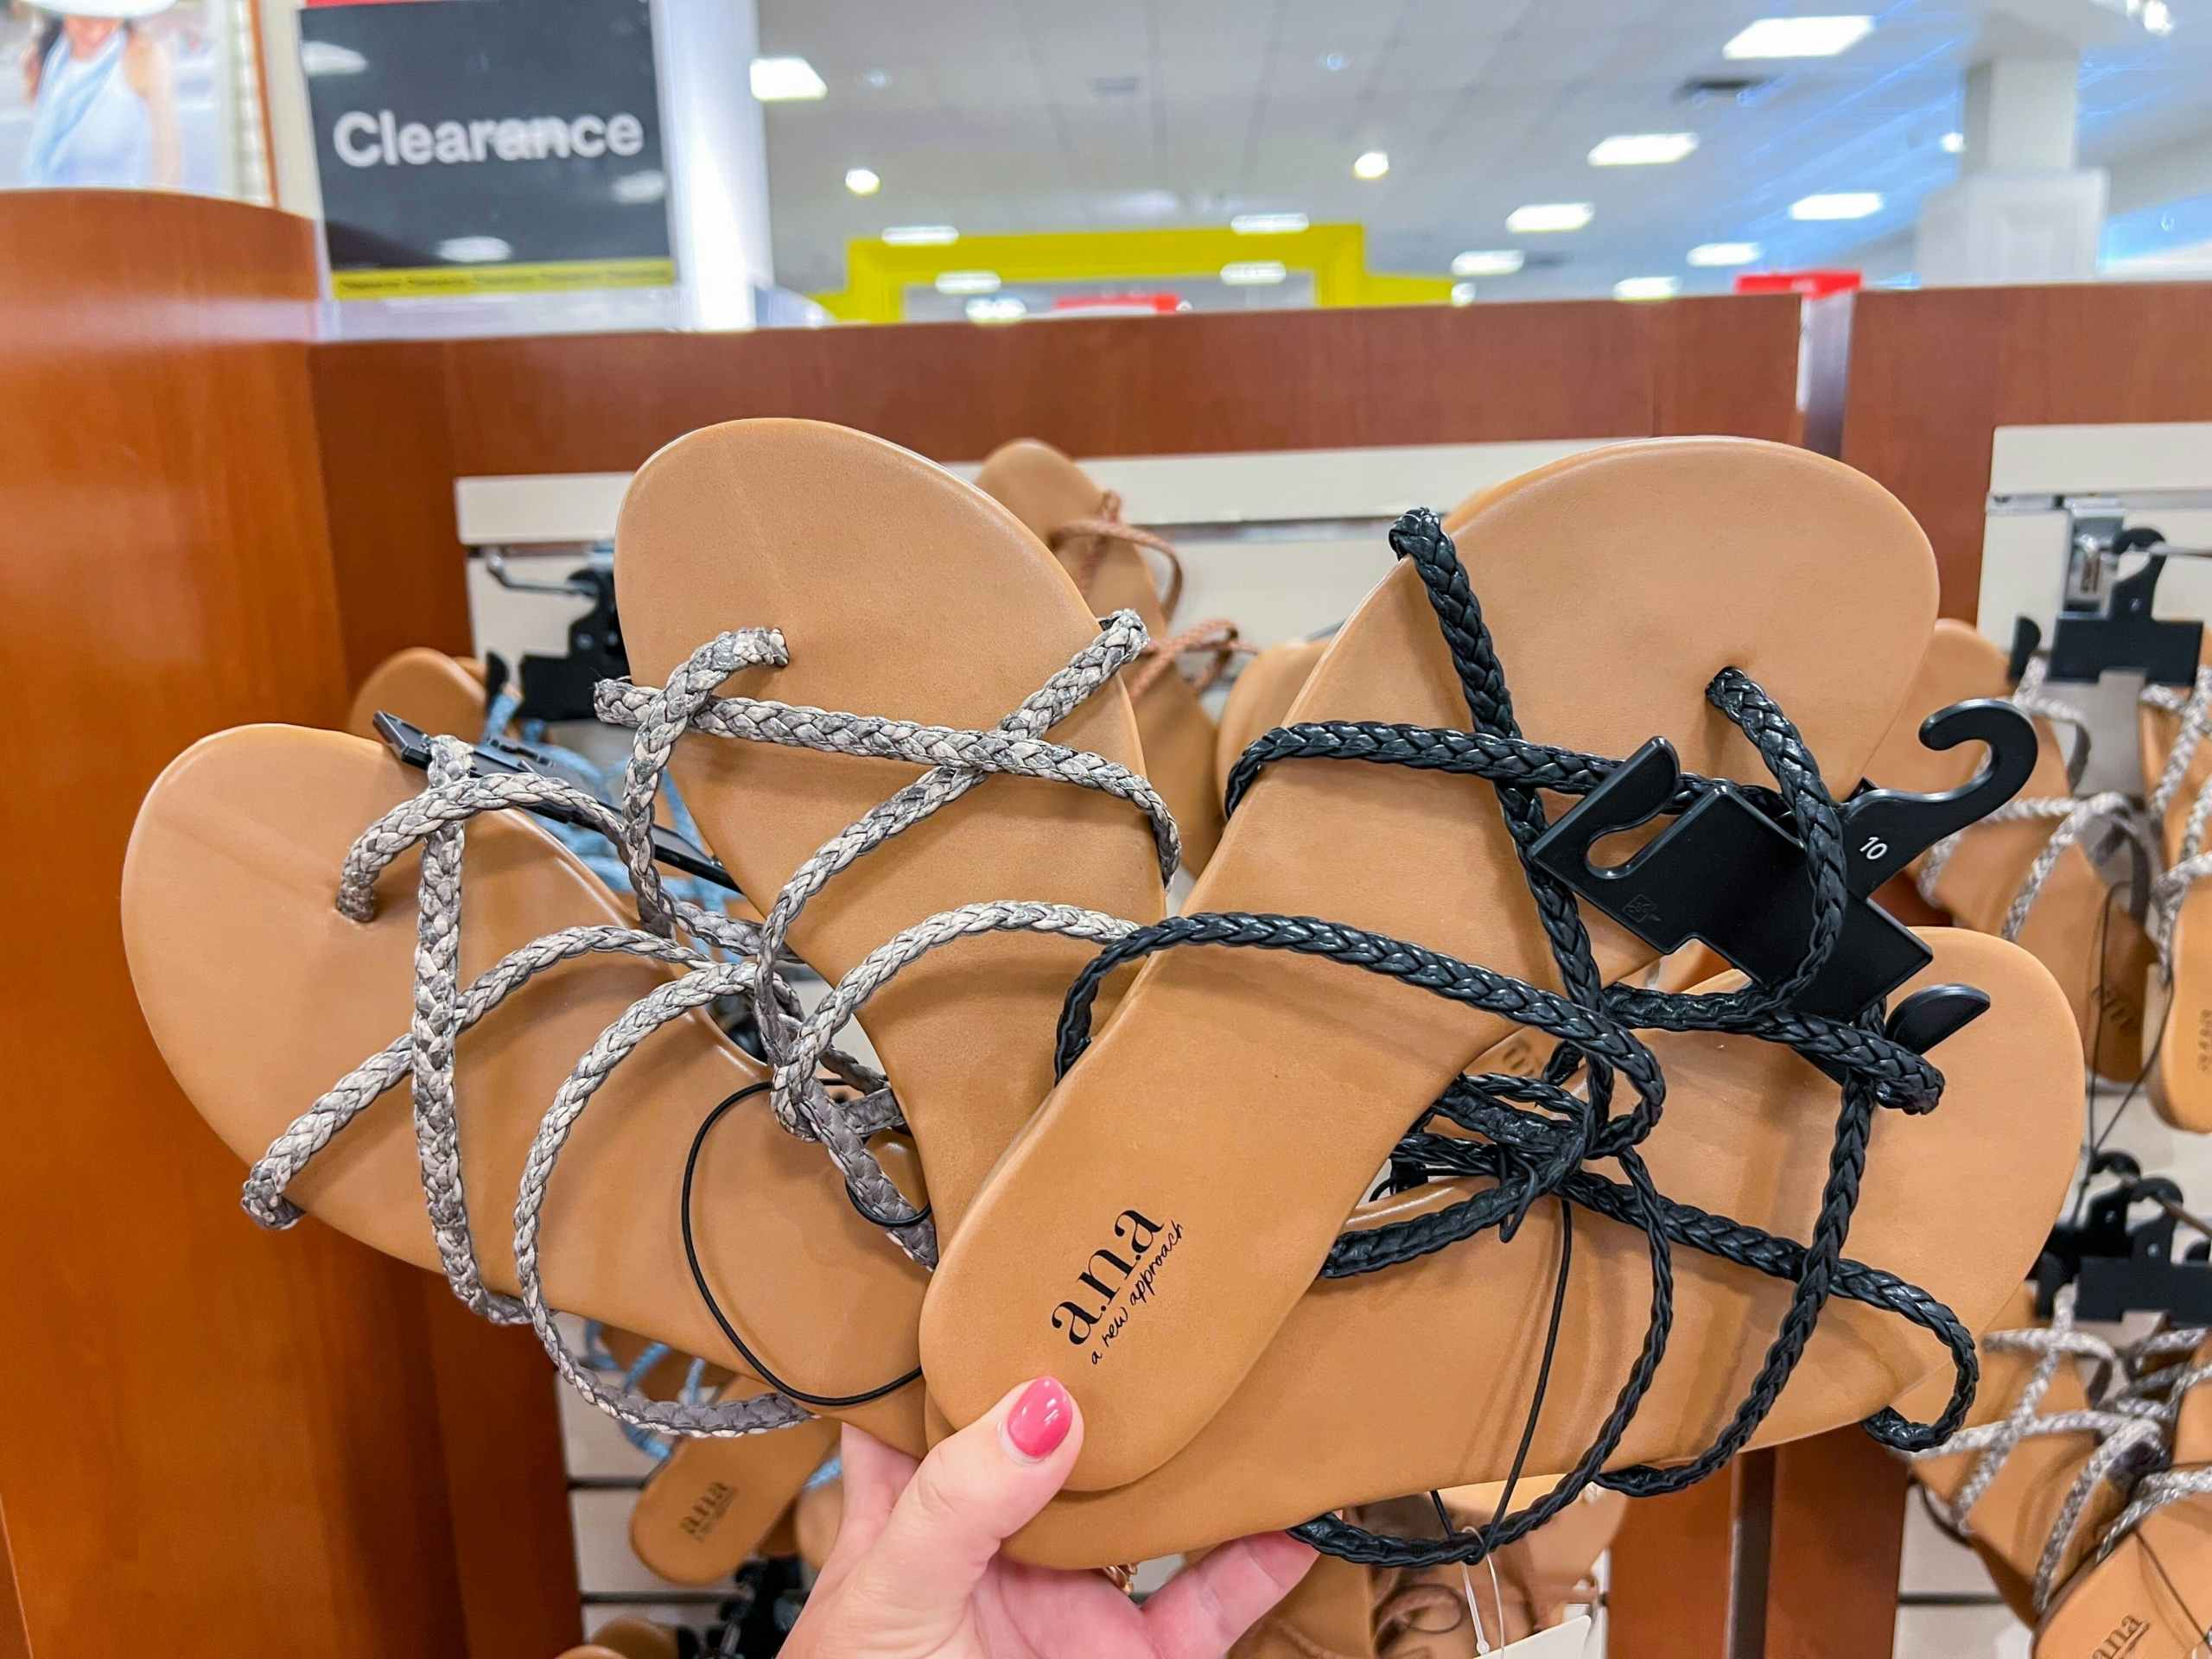 Grab a.n.a Women's Sandals for Only $11.99 at JCPenney